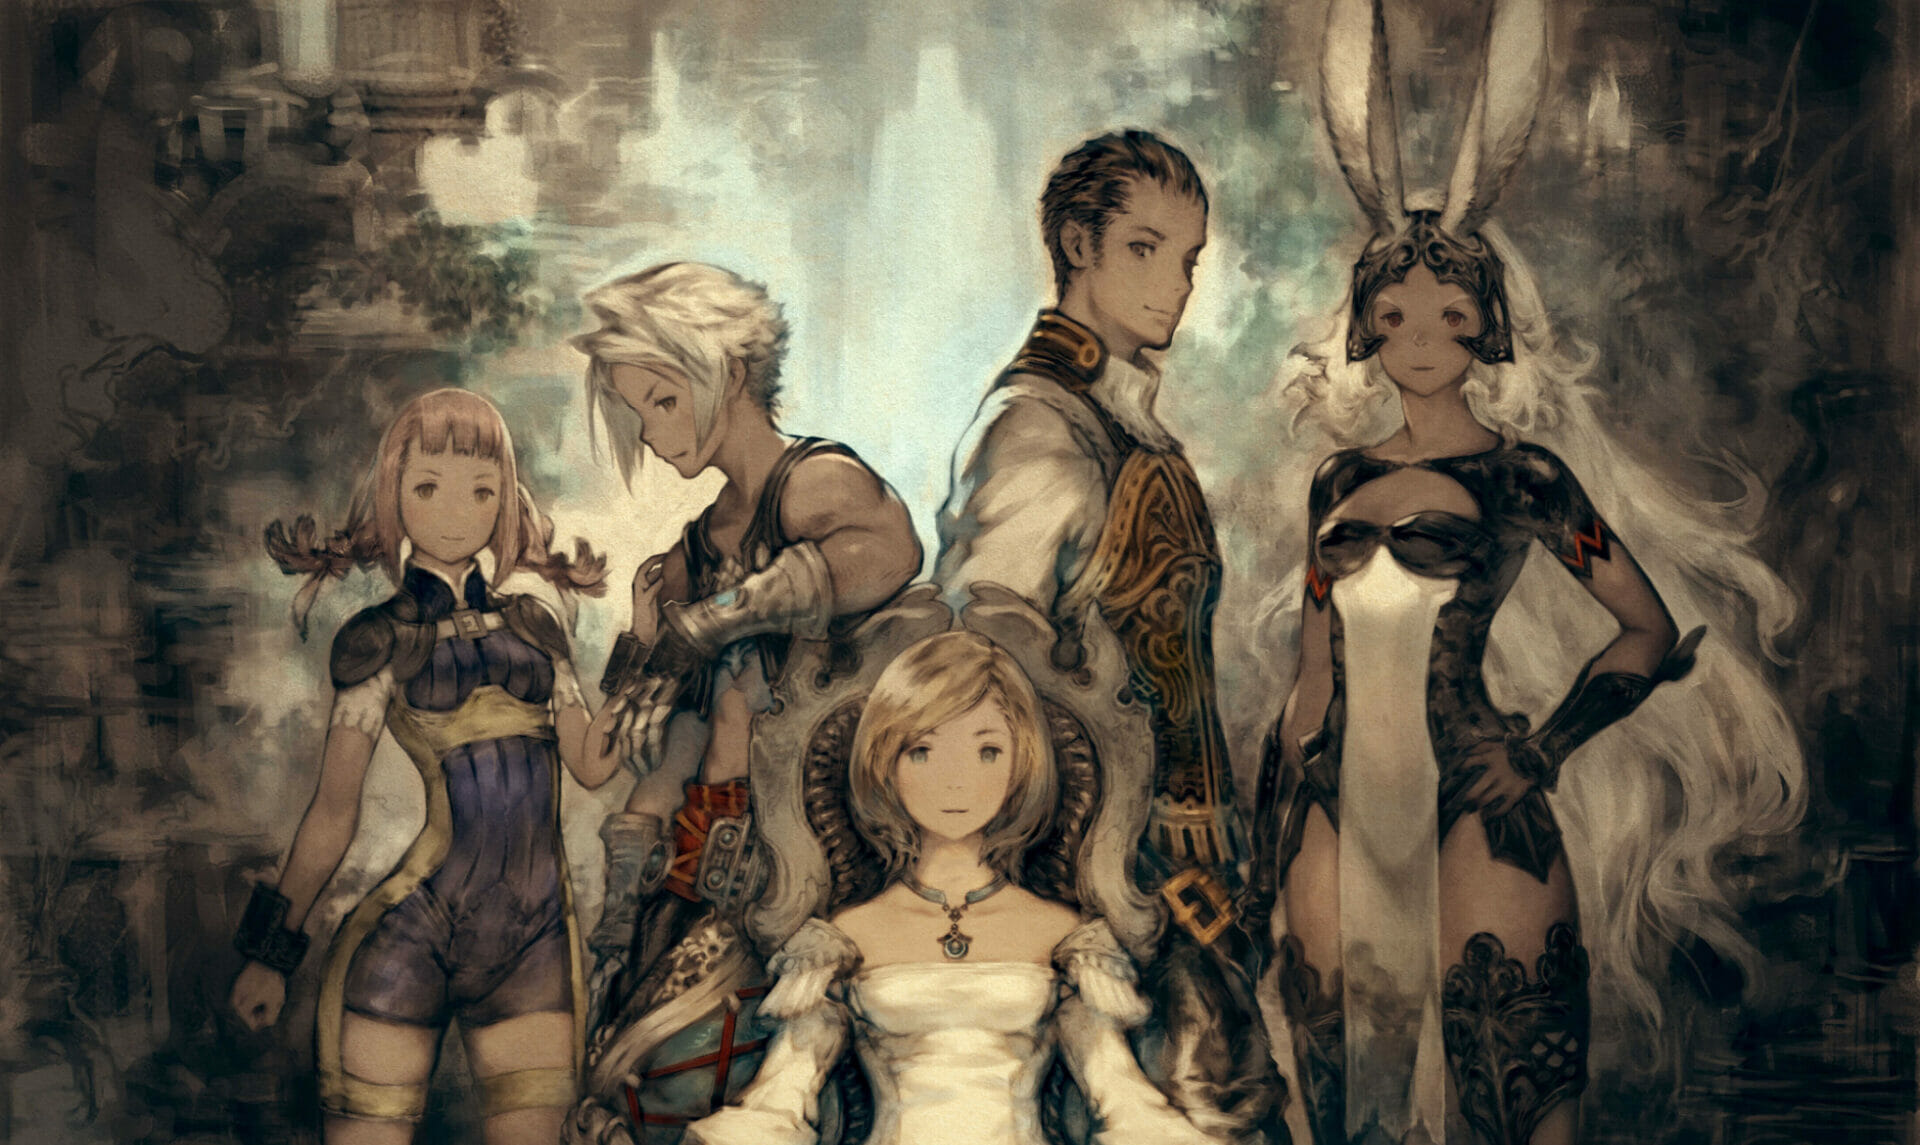 Final Fantasy Xii The Zodiac Age Which Is The Best Platform To Buy It On The Mako Reactor